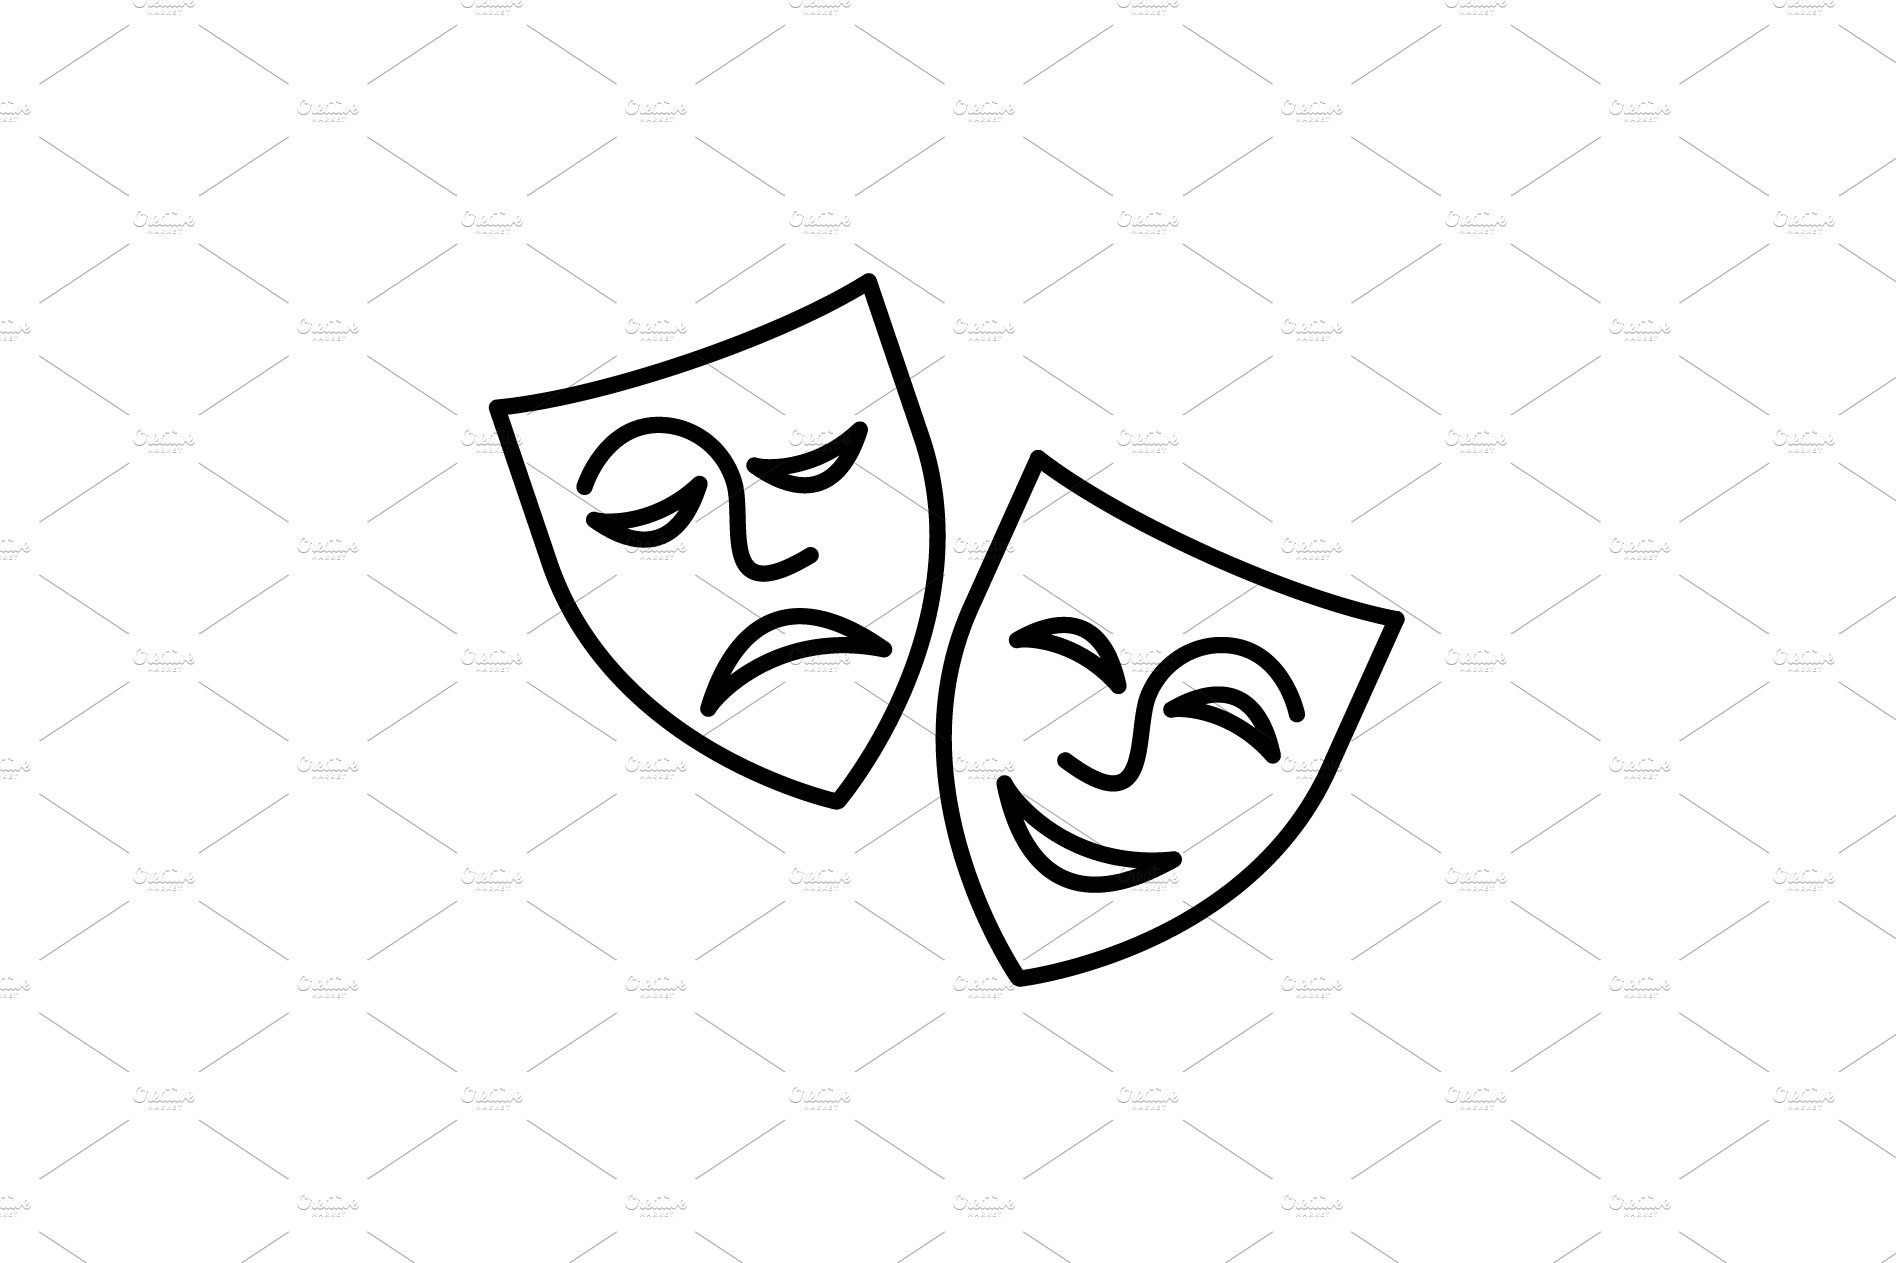 Web icon. Theater masks cover image.